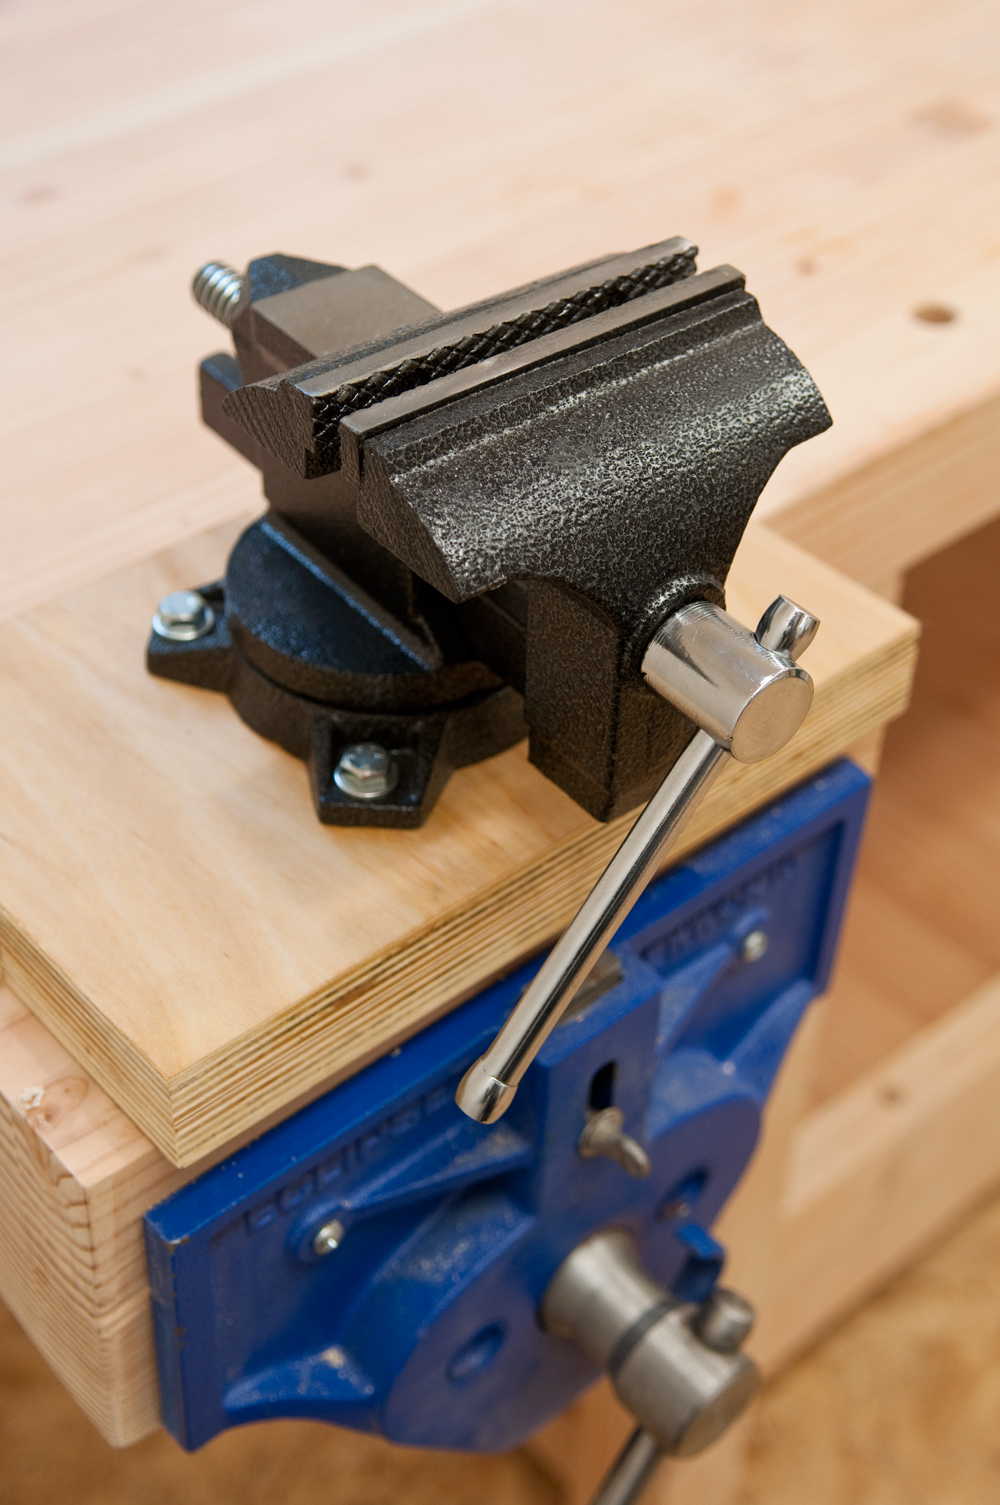 How to install a woodworking vise on a workbench